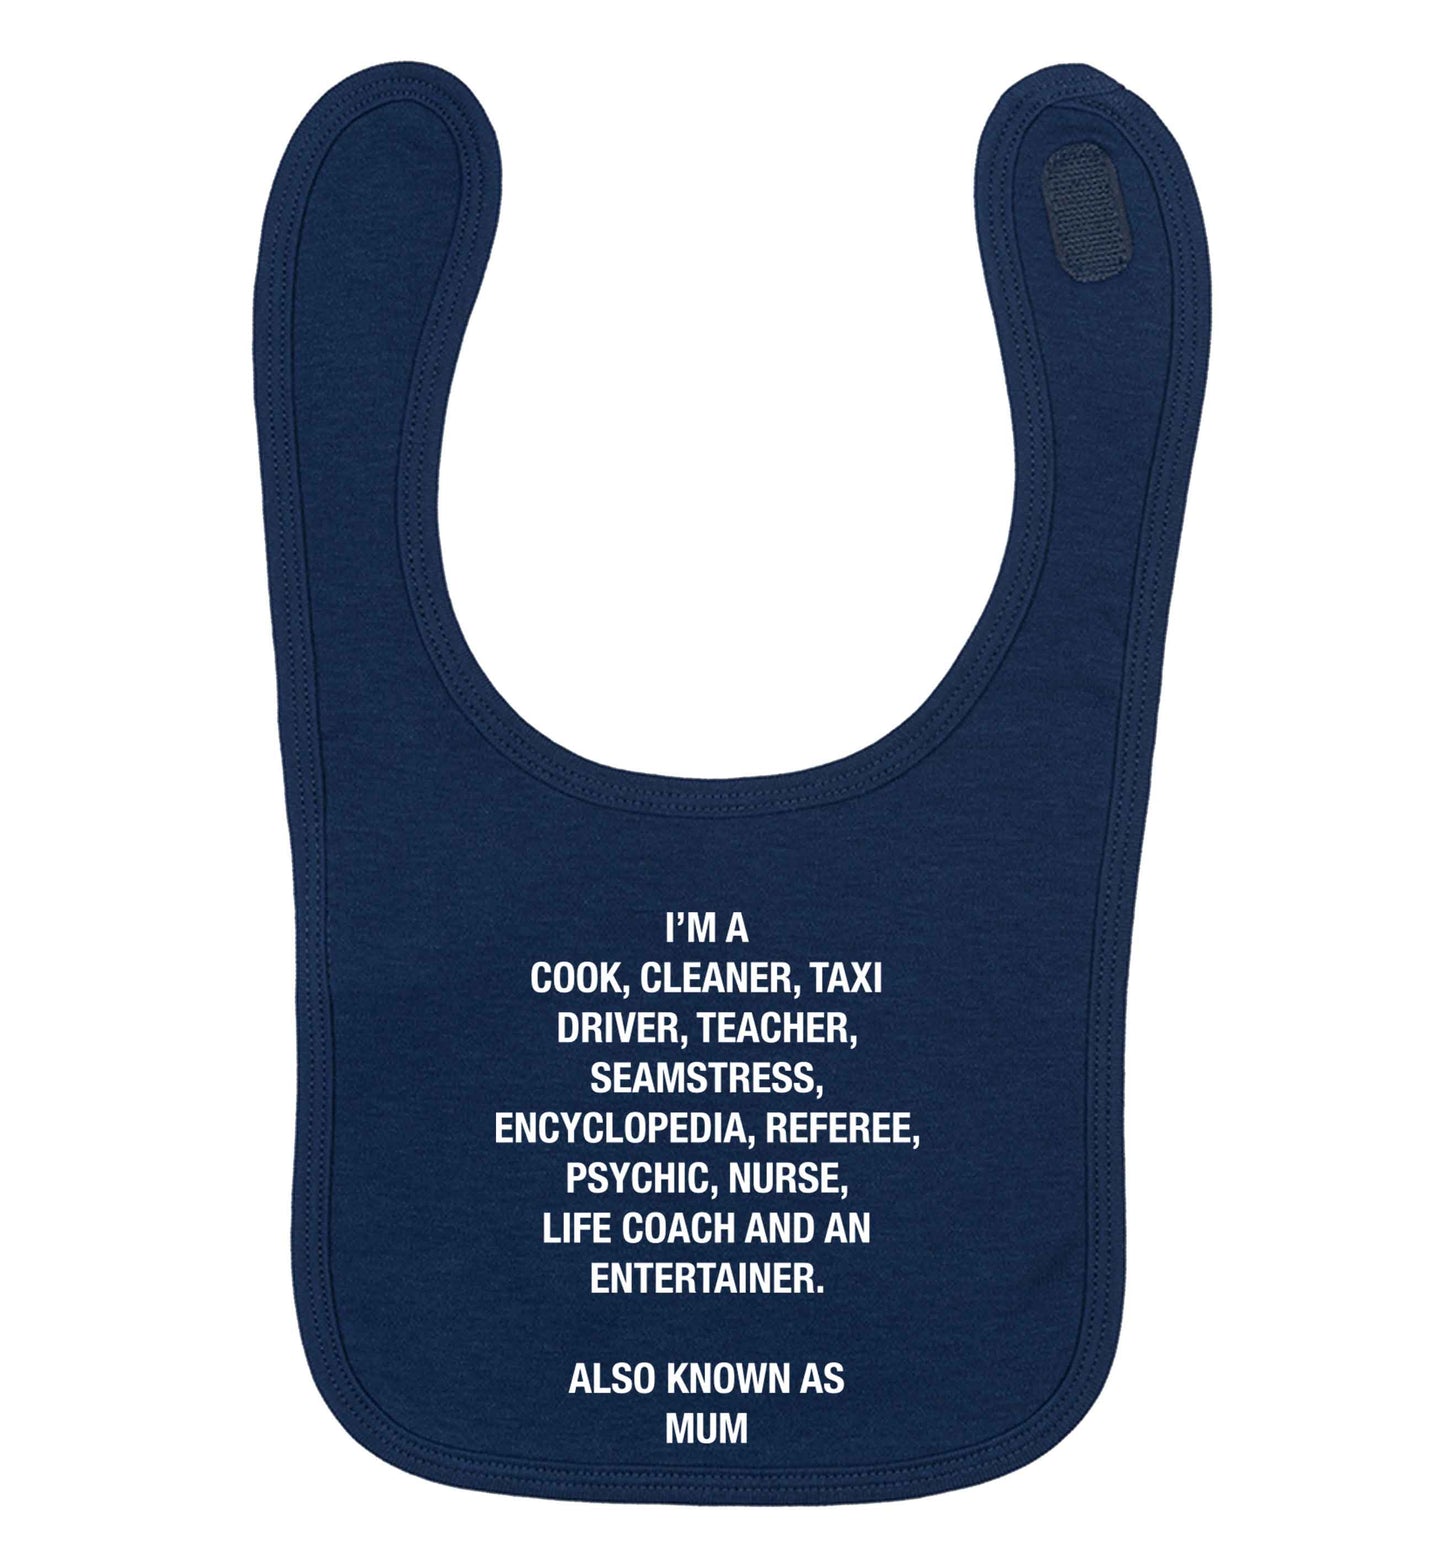 Funny gifts for your mum on mother's dayor her birthday! Mum, cook, cleaner, taxi driver, teacher, seamstress, encyclopedia, referee, psychic, nurse, life coach and entertainer navy baby bib